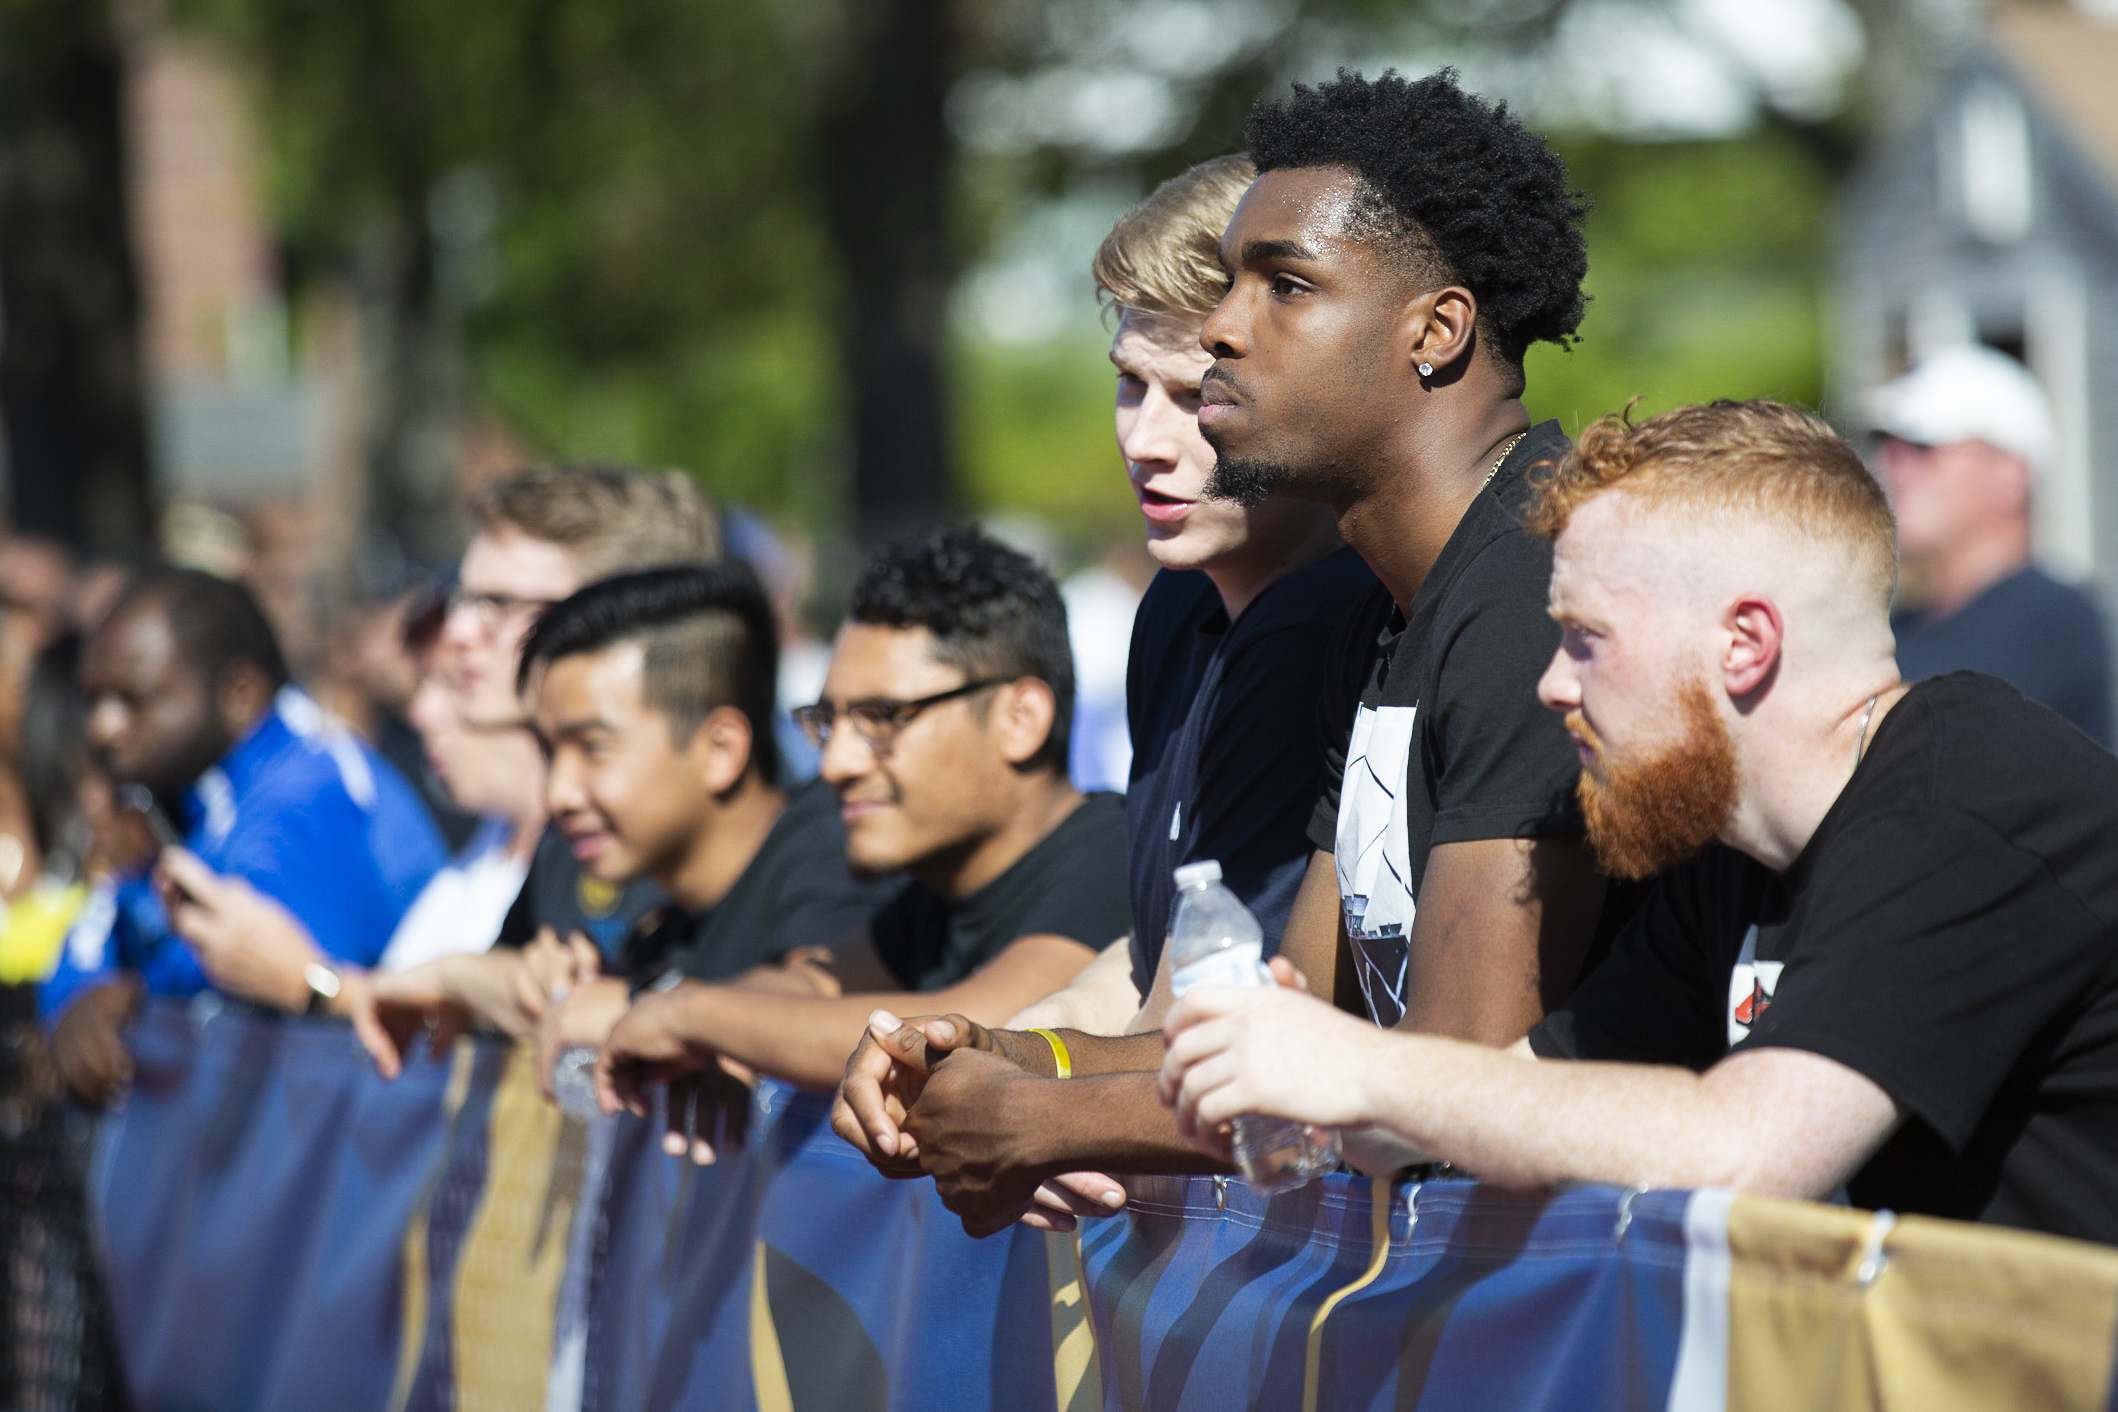 Worcester State university football fans watching the game on the sidelines